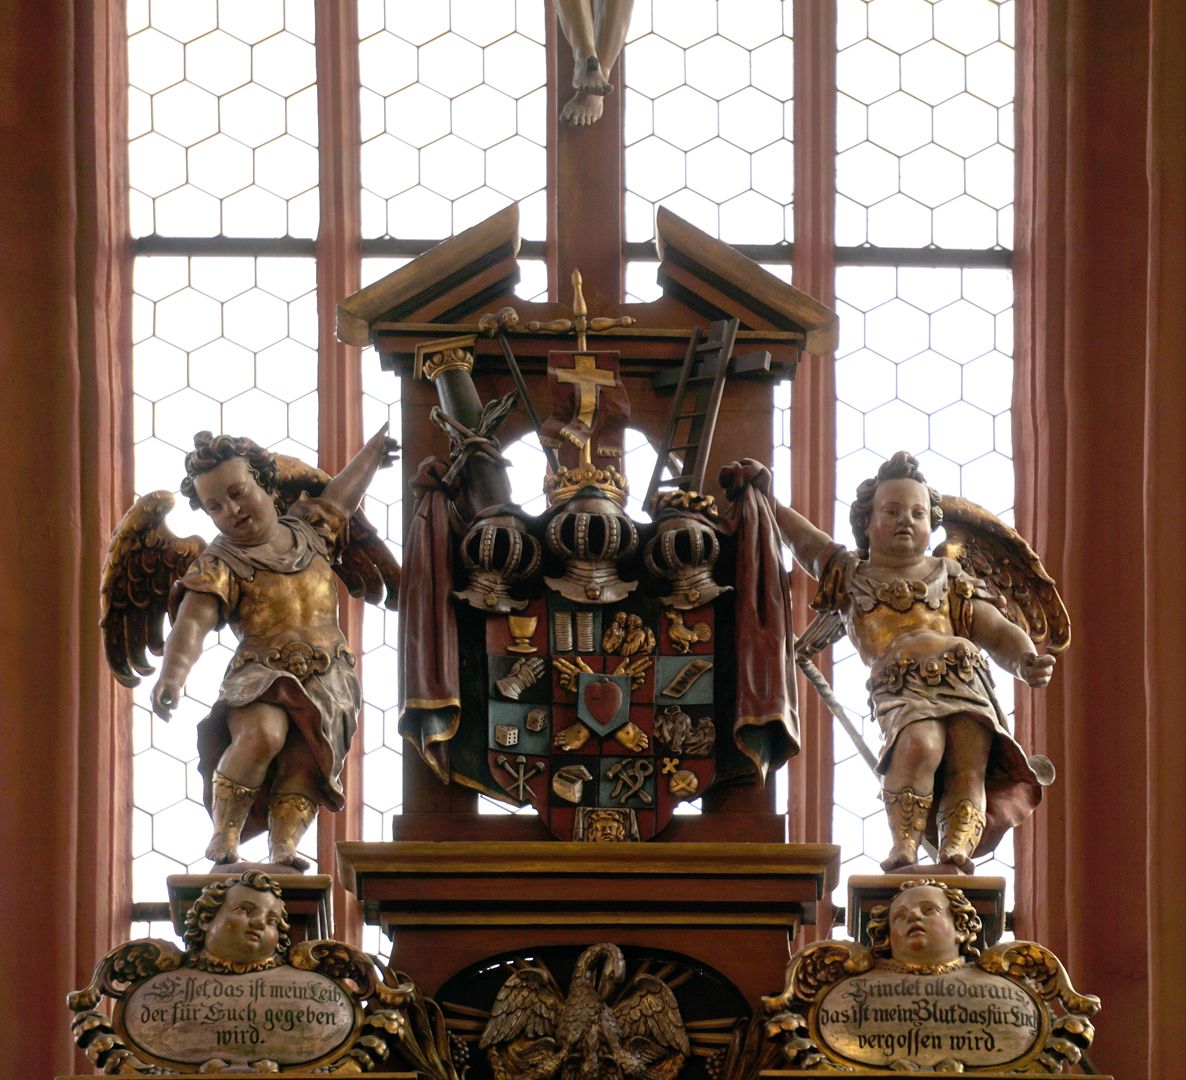 High Altar upper finial: crucifix, coat of arms with Passion insignia, below a pelican